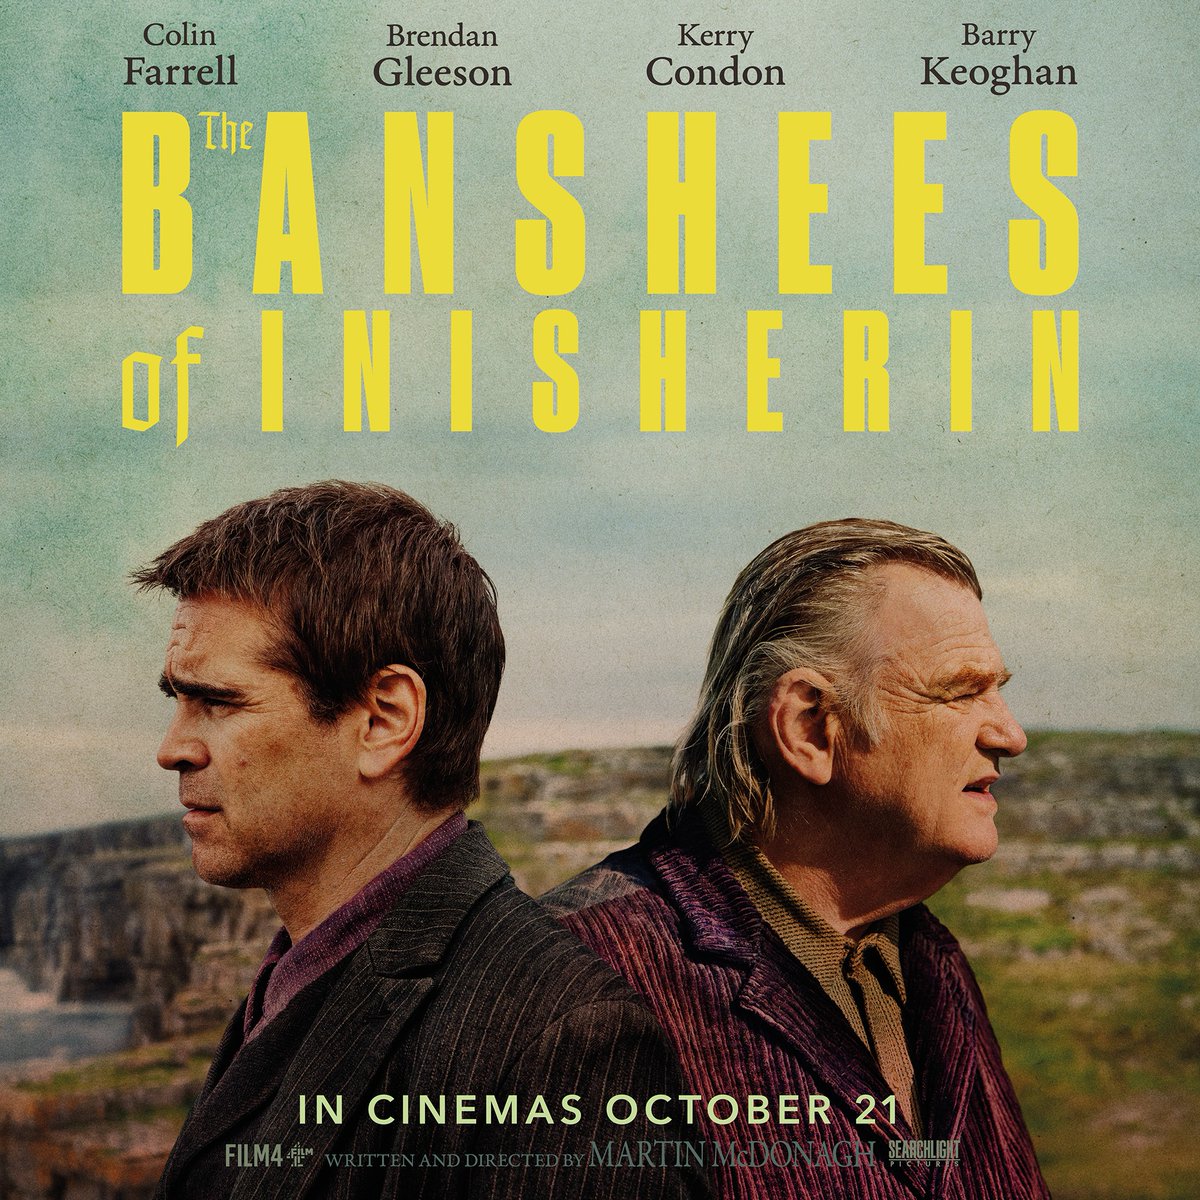 🚨 Competition Alert 🚨 We are buzzing after the Irish premiere of THE BANSHEES OF INISHERIN last night! Thanks to our friends @SearchlightIE we have a preview on Oct 18 and we have tickets to give away so if you want to win just RT this! Best of luck 🍀